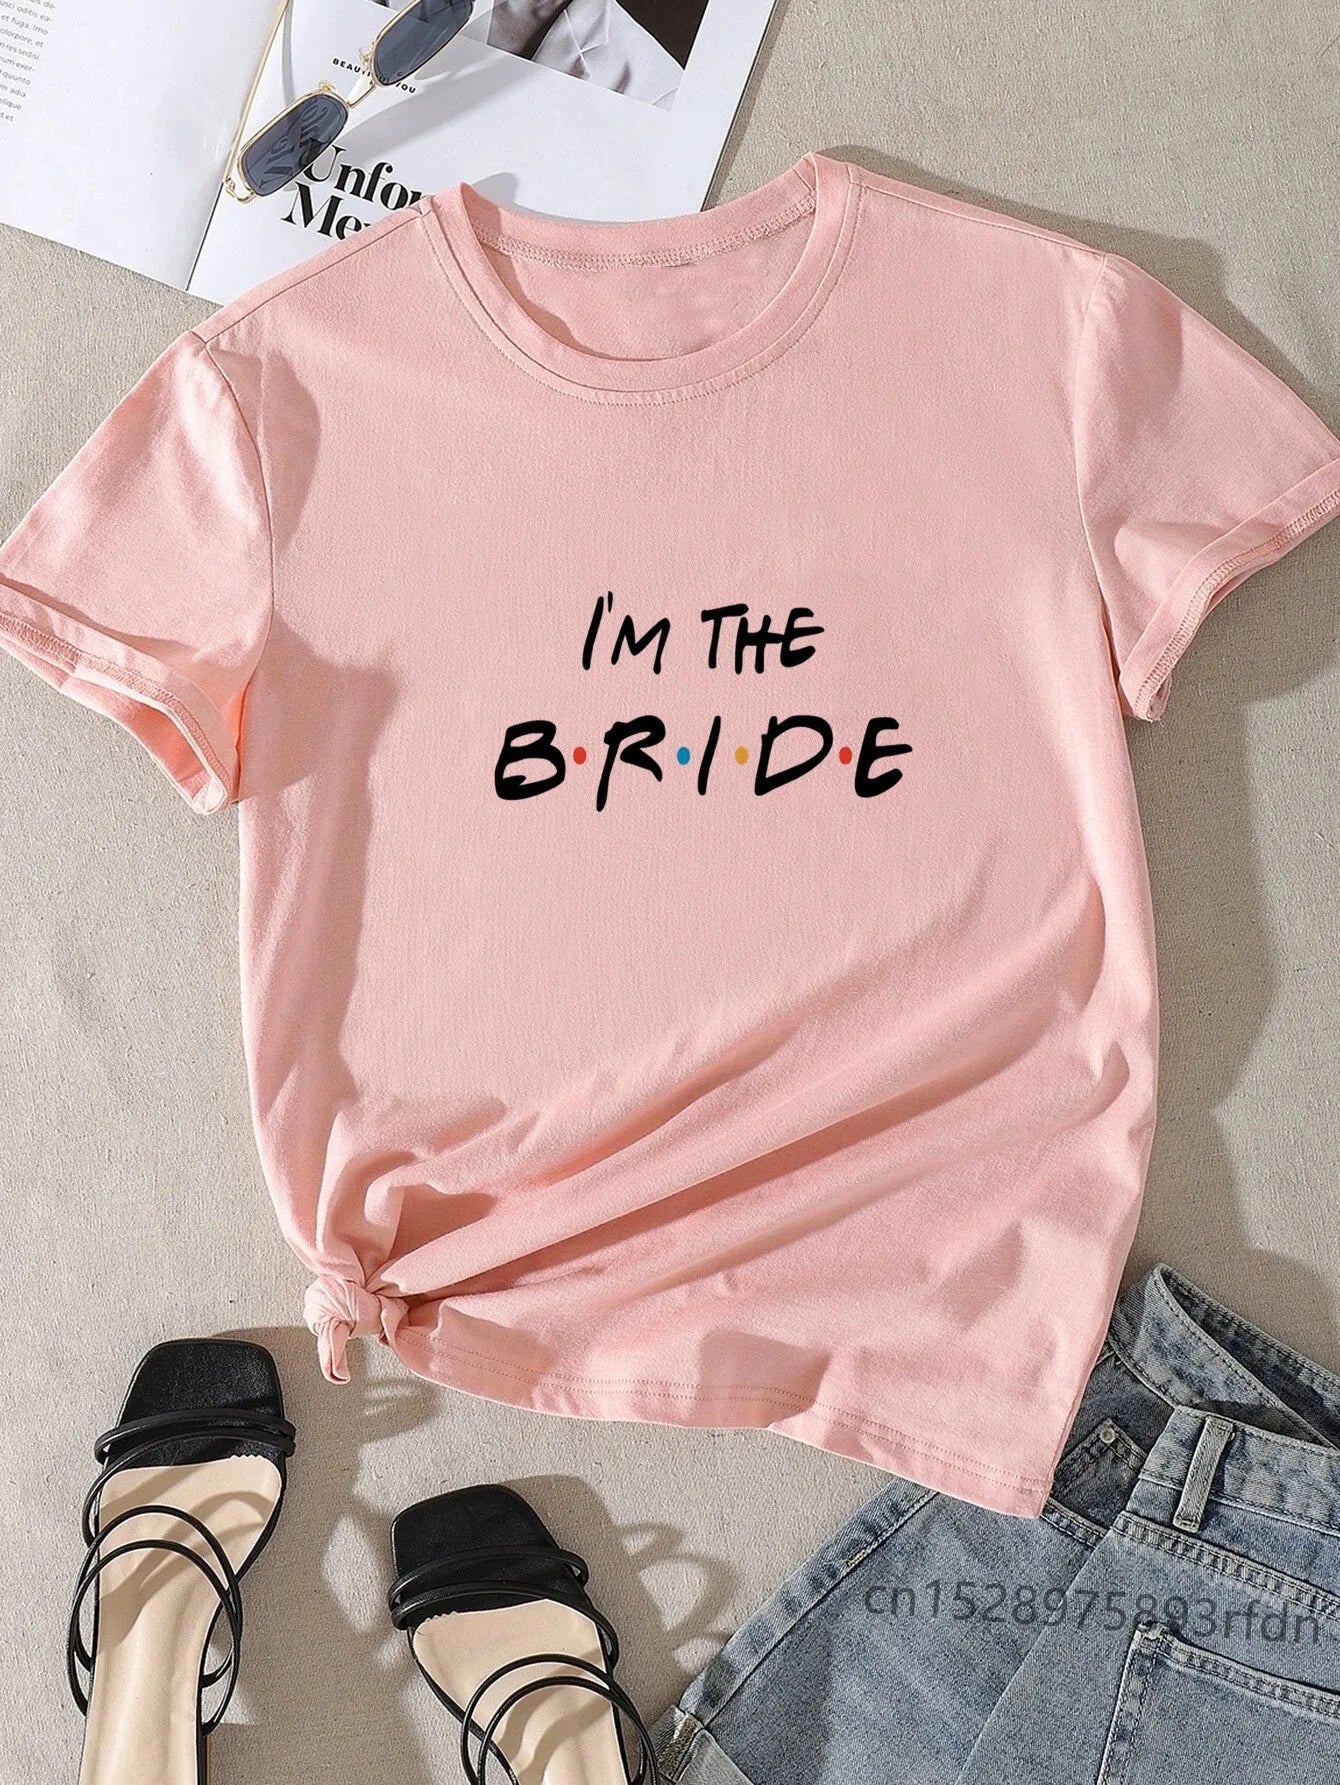 Women I Do Crew Will Be There For You Team Bride Bachelorette T-shirts Girl Evfj Hen Party Tops Tee Lady Birde To Be Clothes - OnlineshopLand